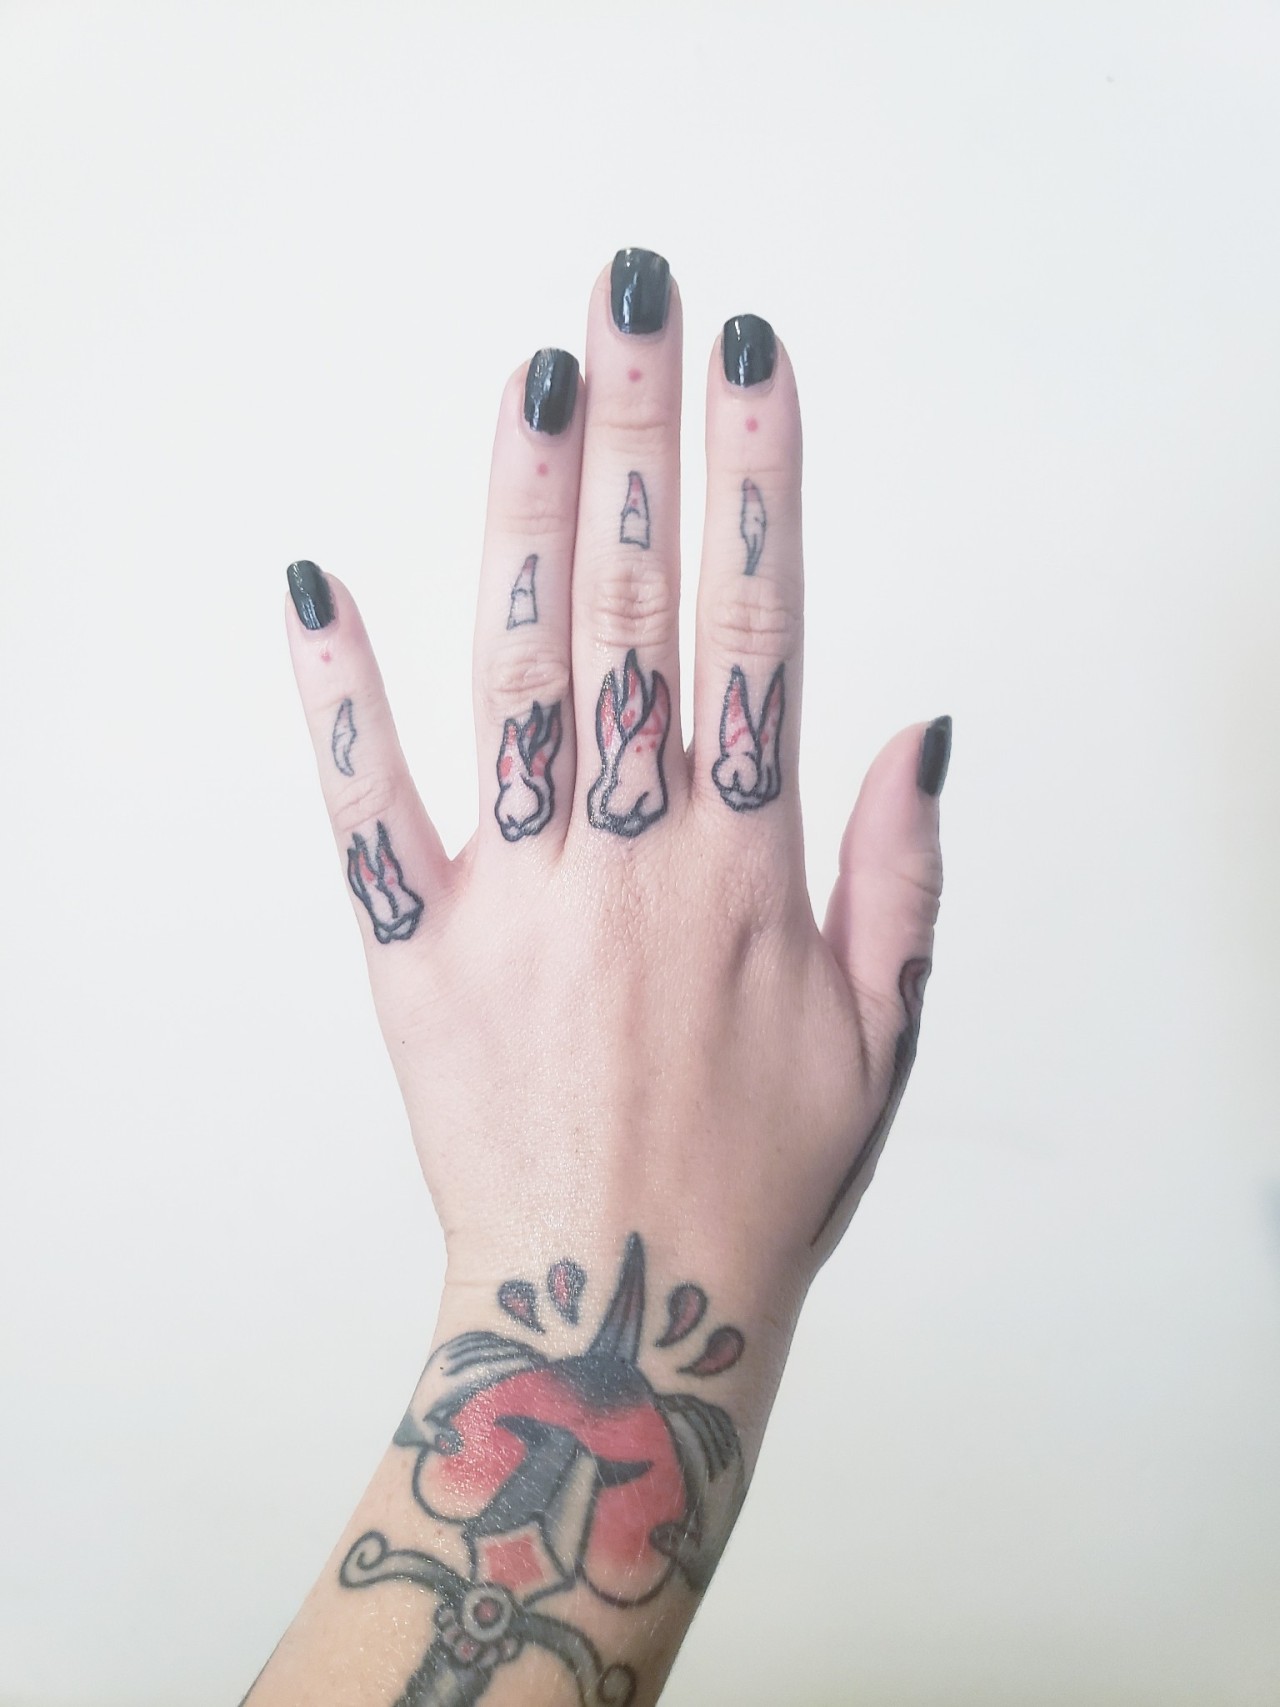 Finger tattoos? Sign me up!😩... - Tattoo Studio Tequila Ink | Facebook